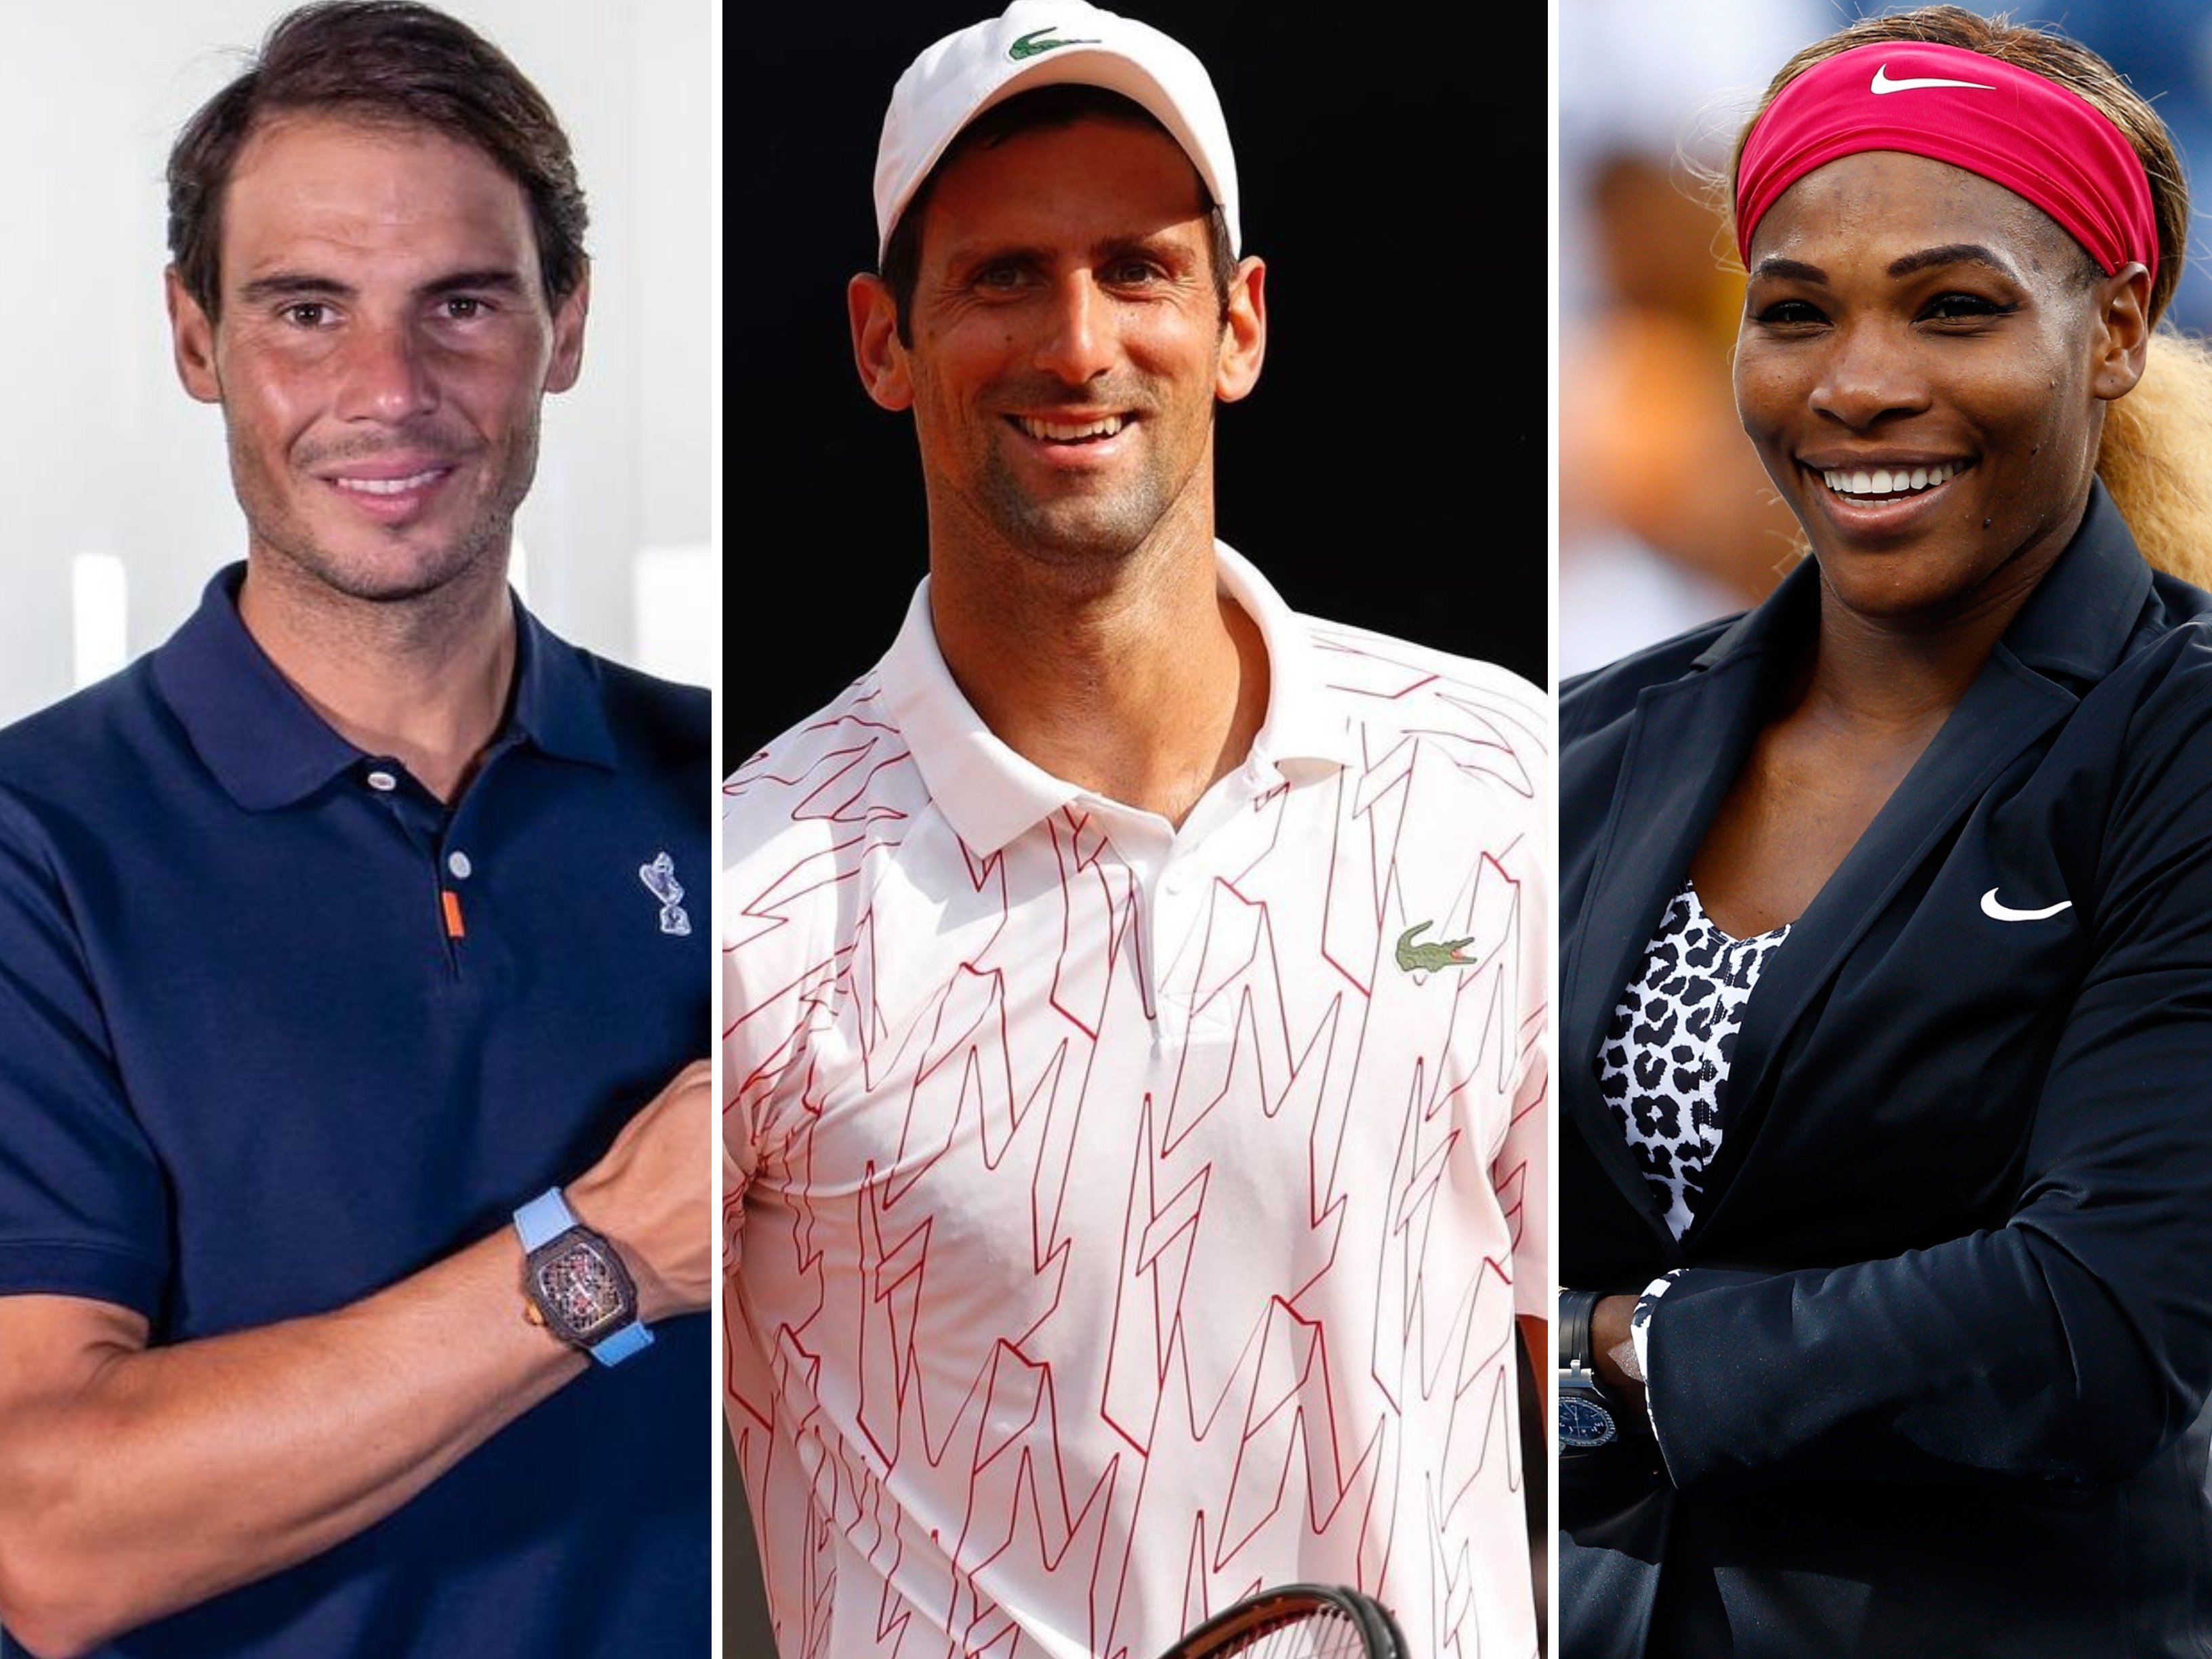 Rafael Nadal, Novak Djokovic and Serena Williams are among the world’s greatest – and richest – tennis players. Photos: Instagram/@rafaelnadal, @djokernole; Getty Images